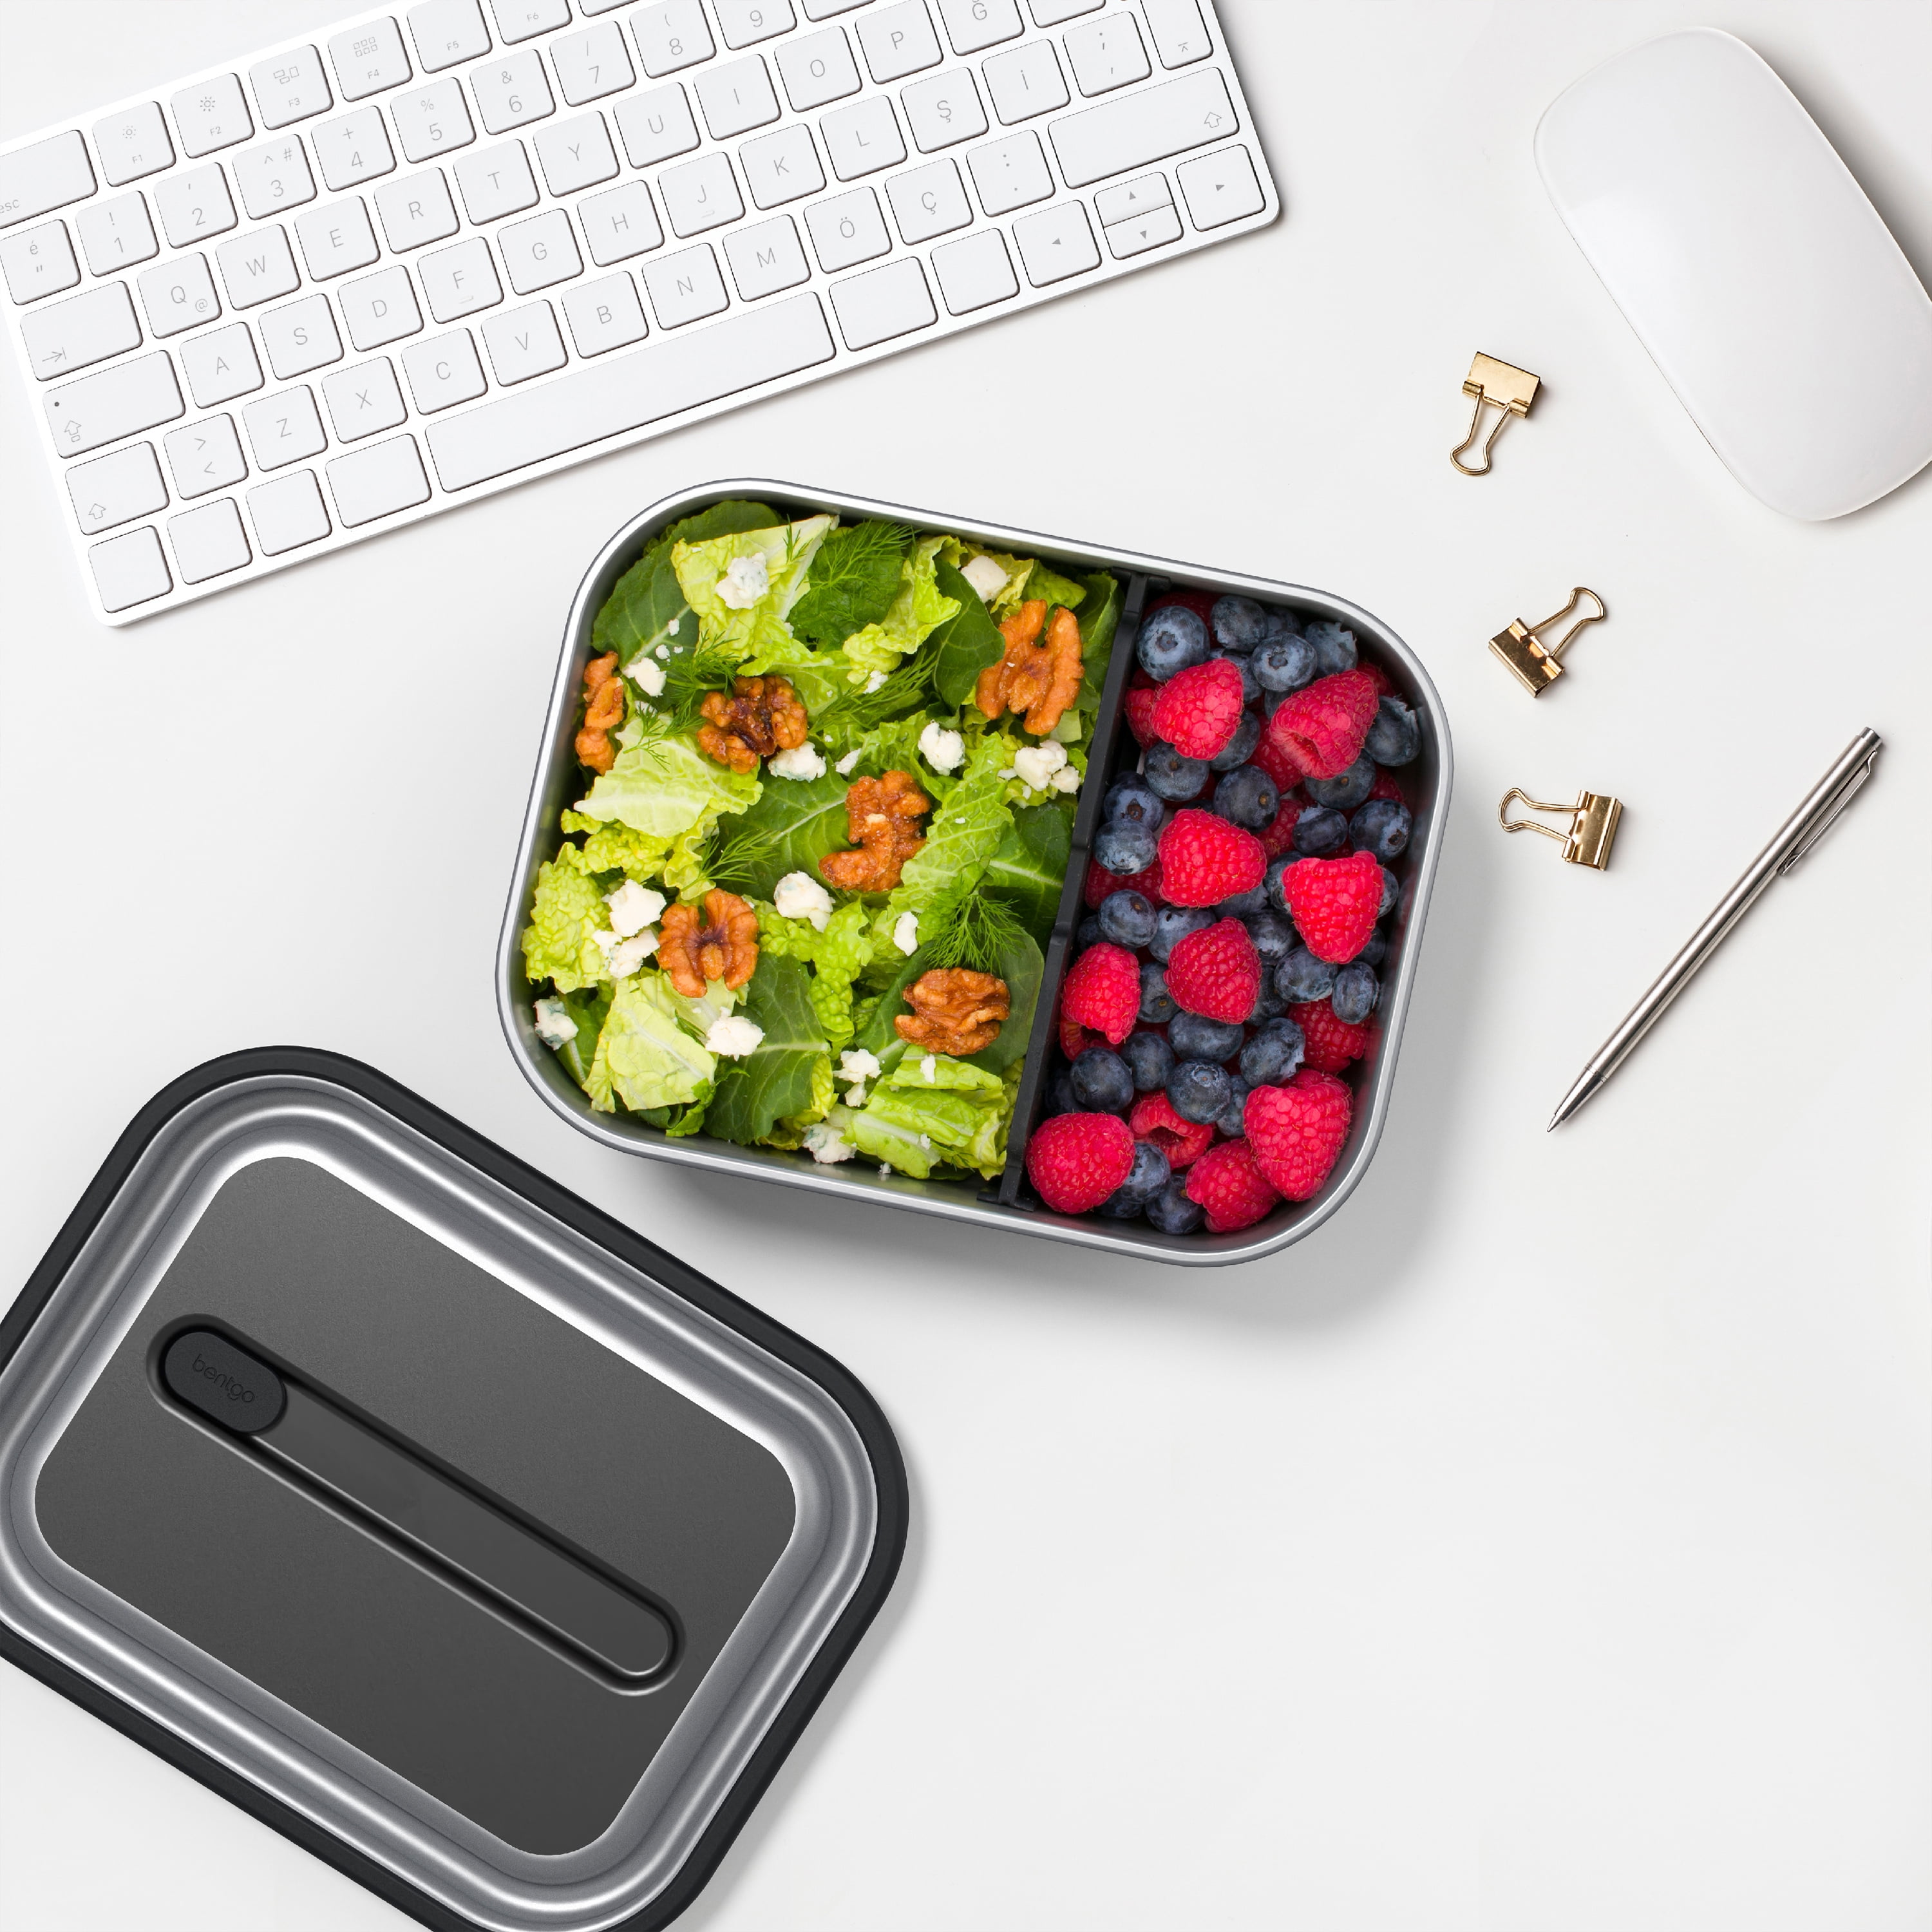 Bentgo® MicroSteel® Leak-Proof Lunch Box - Microwave-Safe, Oven-Safe,  Bento-Style Container with Removable Divider, Airtight Lid, Sustainable  Design